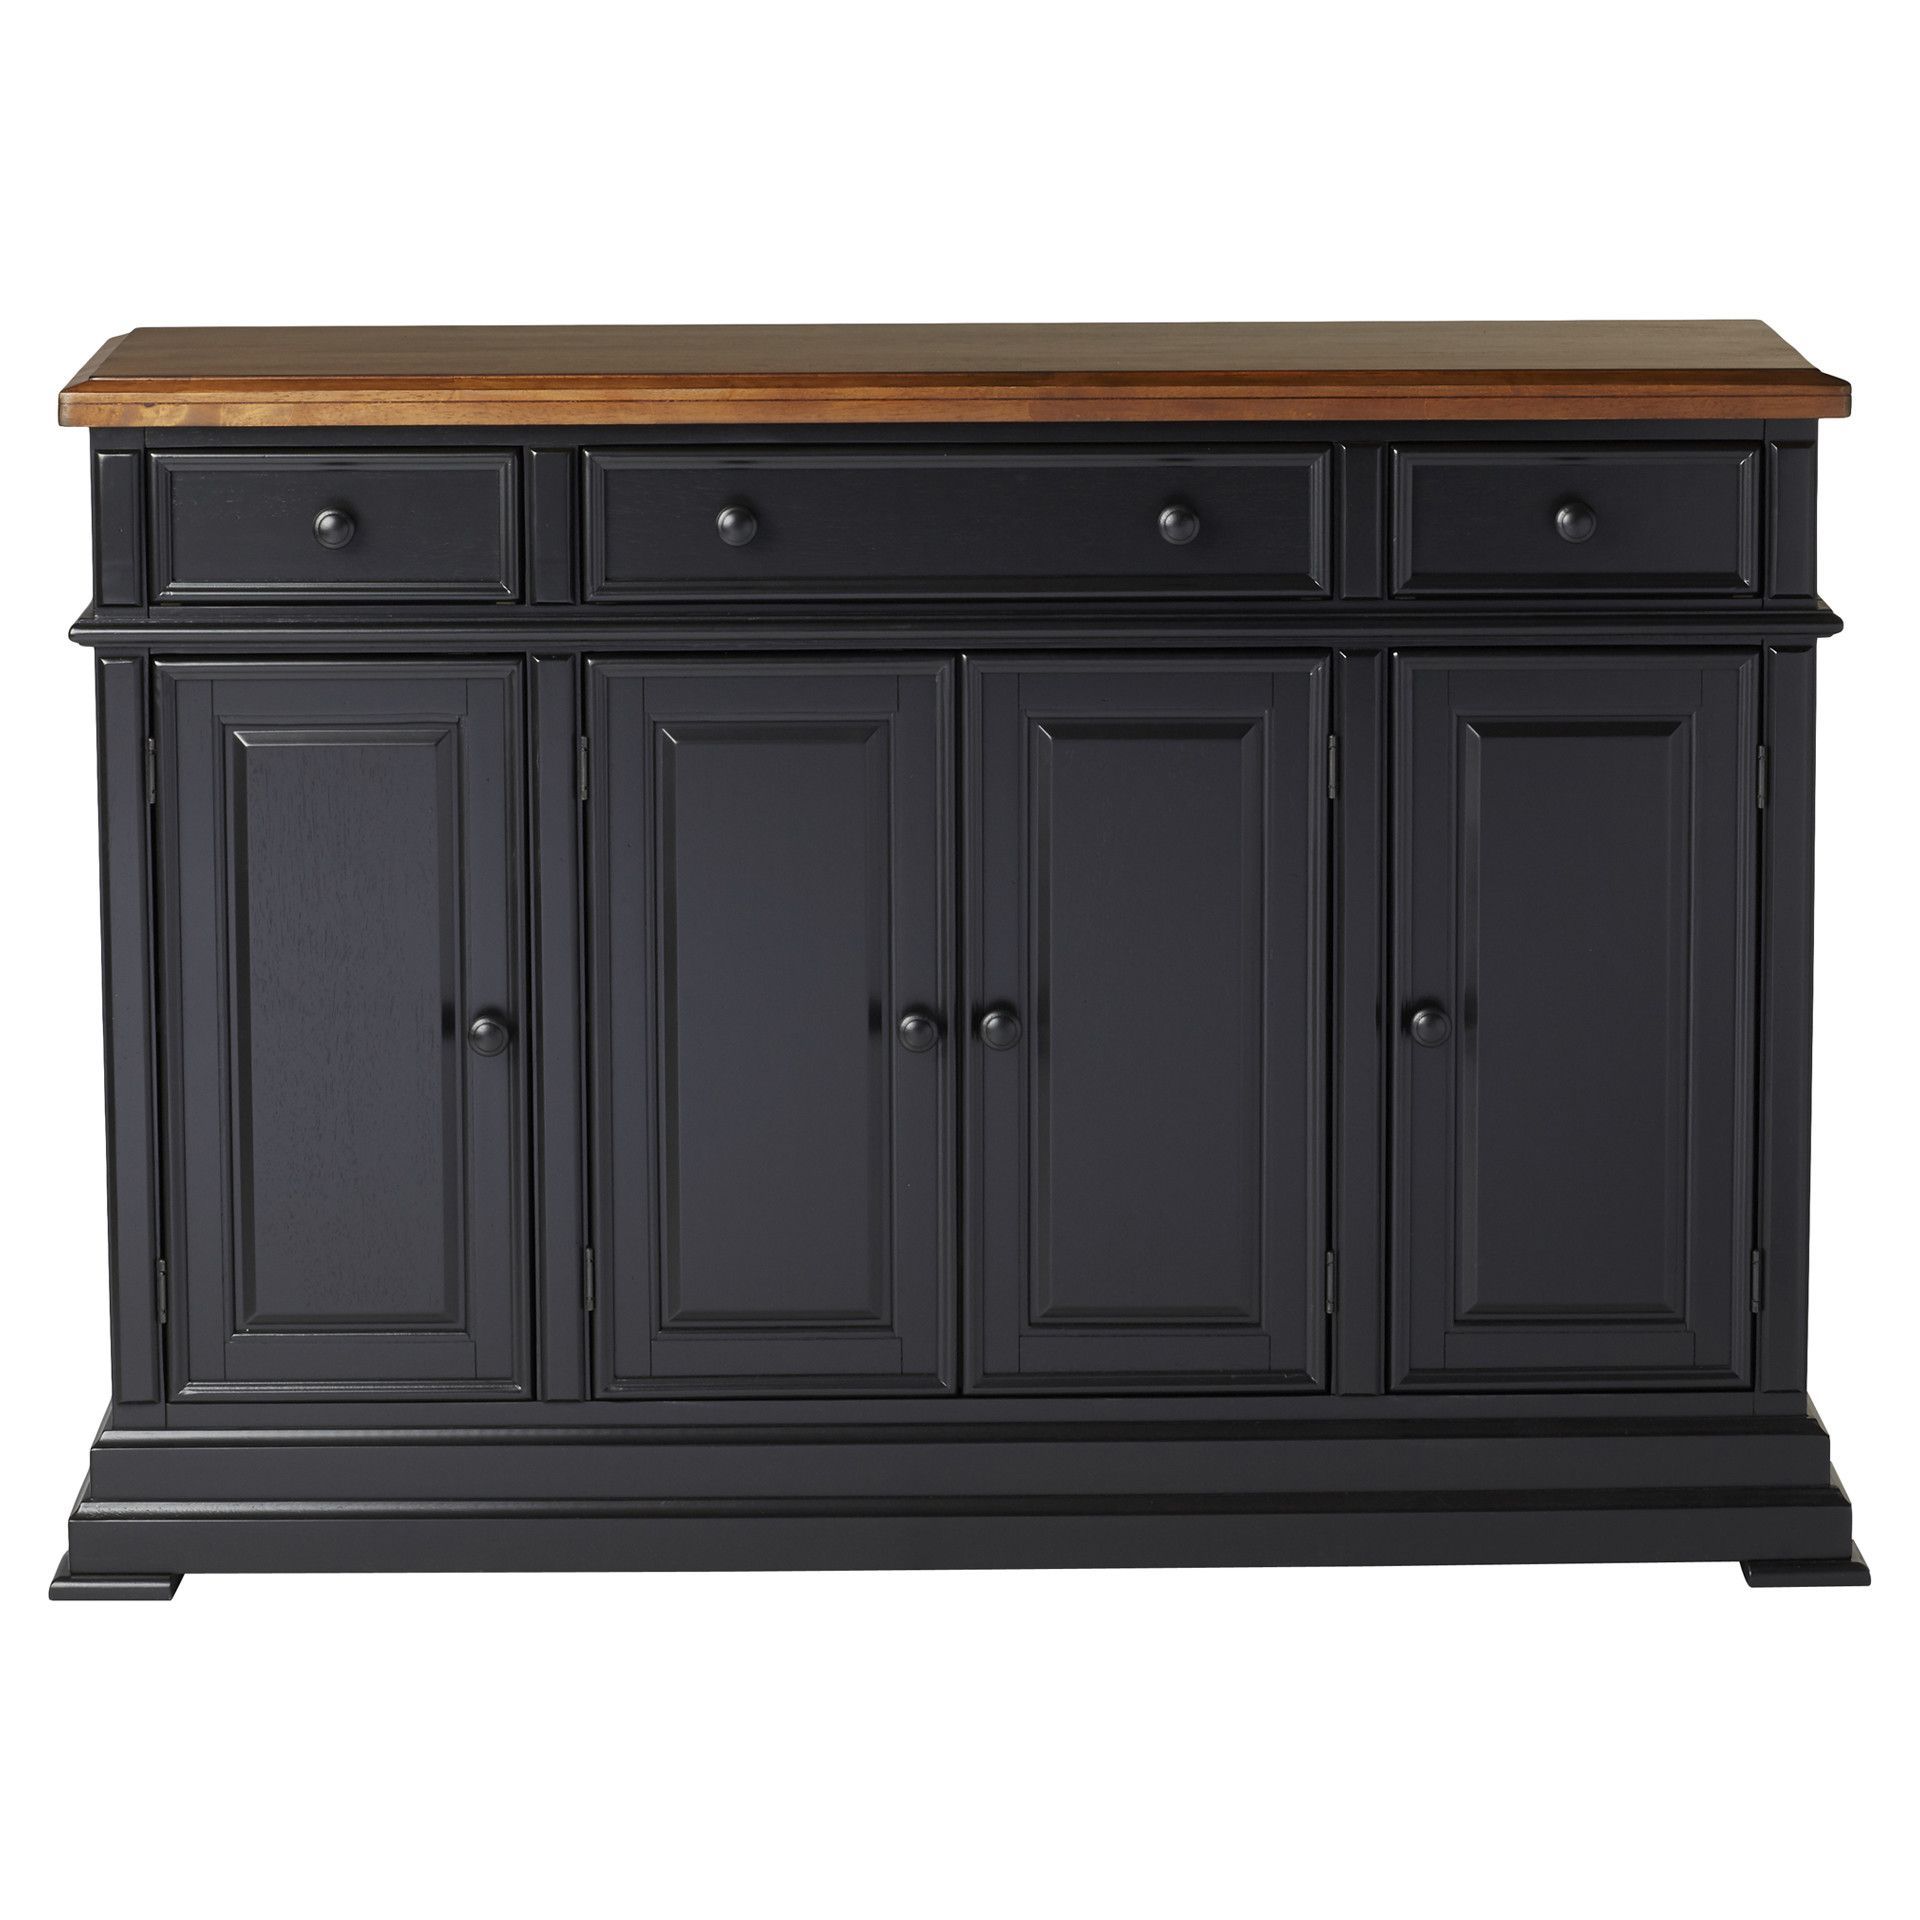 Courtdale Sideboard | Home | Sideboard, Buffet Cabinet Intended For Courtdale Sideboards (View 4 of 30)